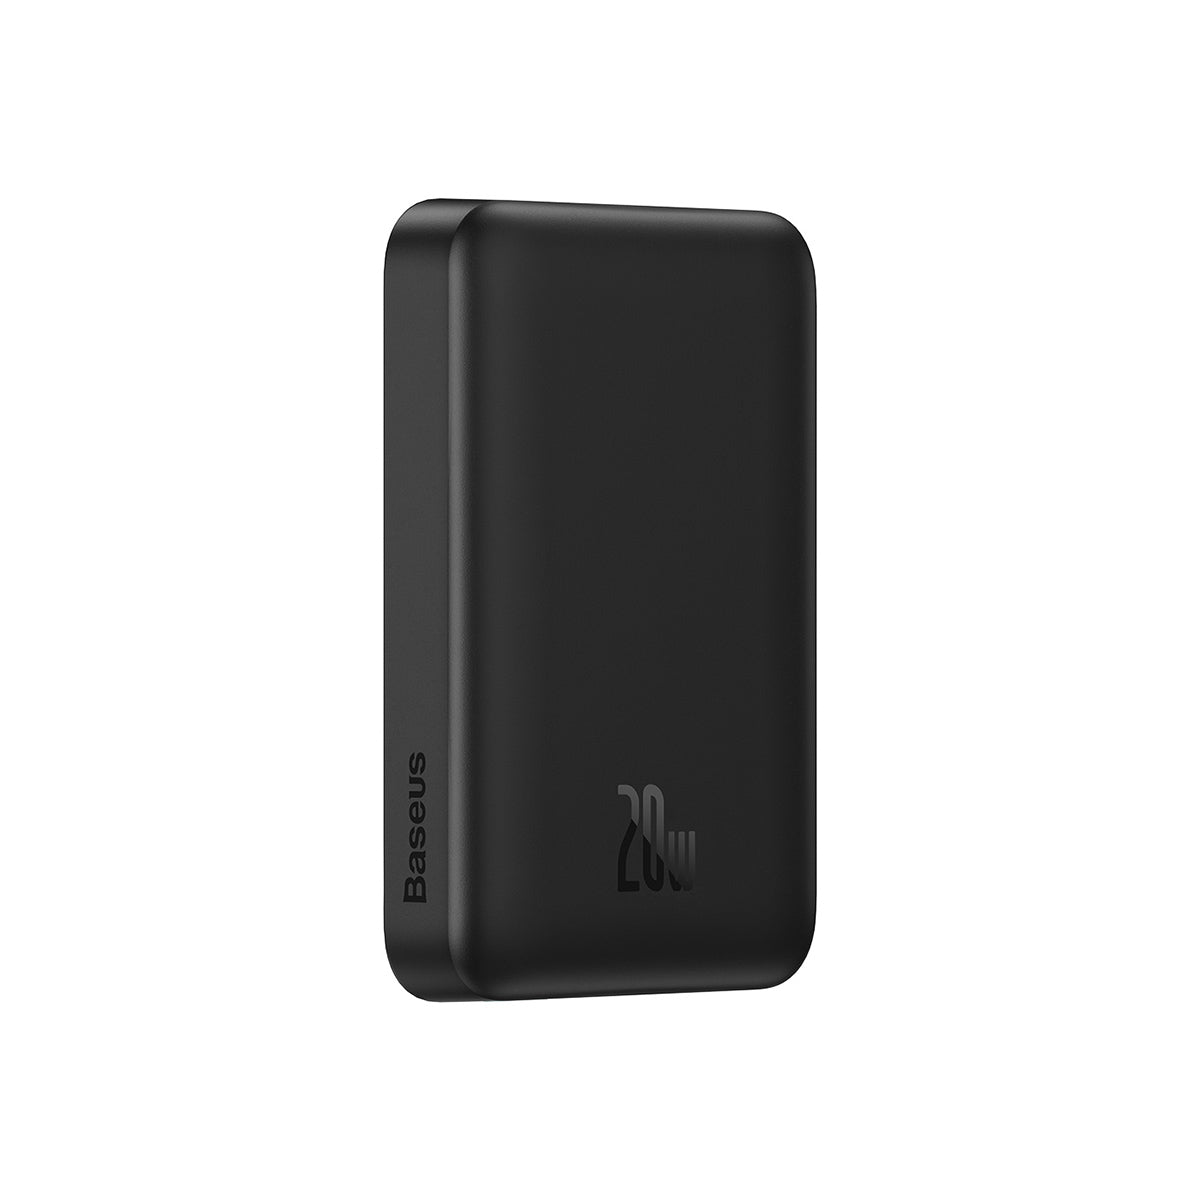 Take 35% off a wireless battery pack at